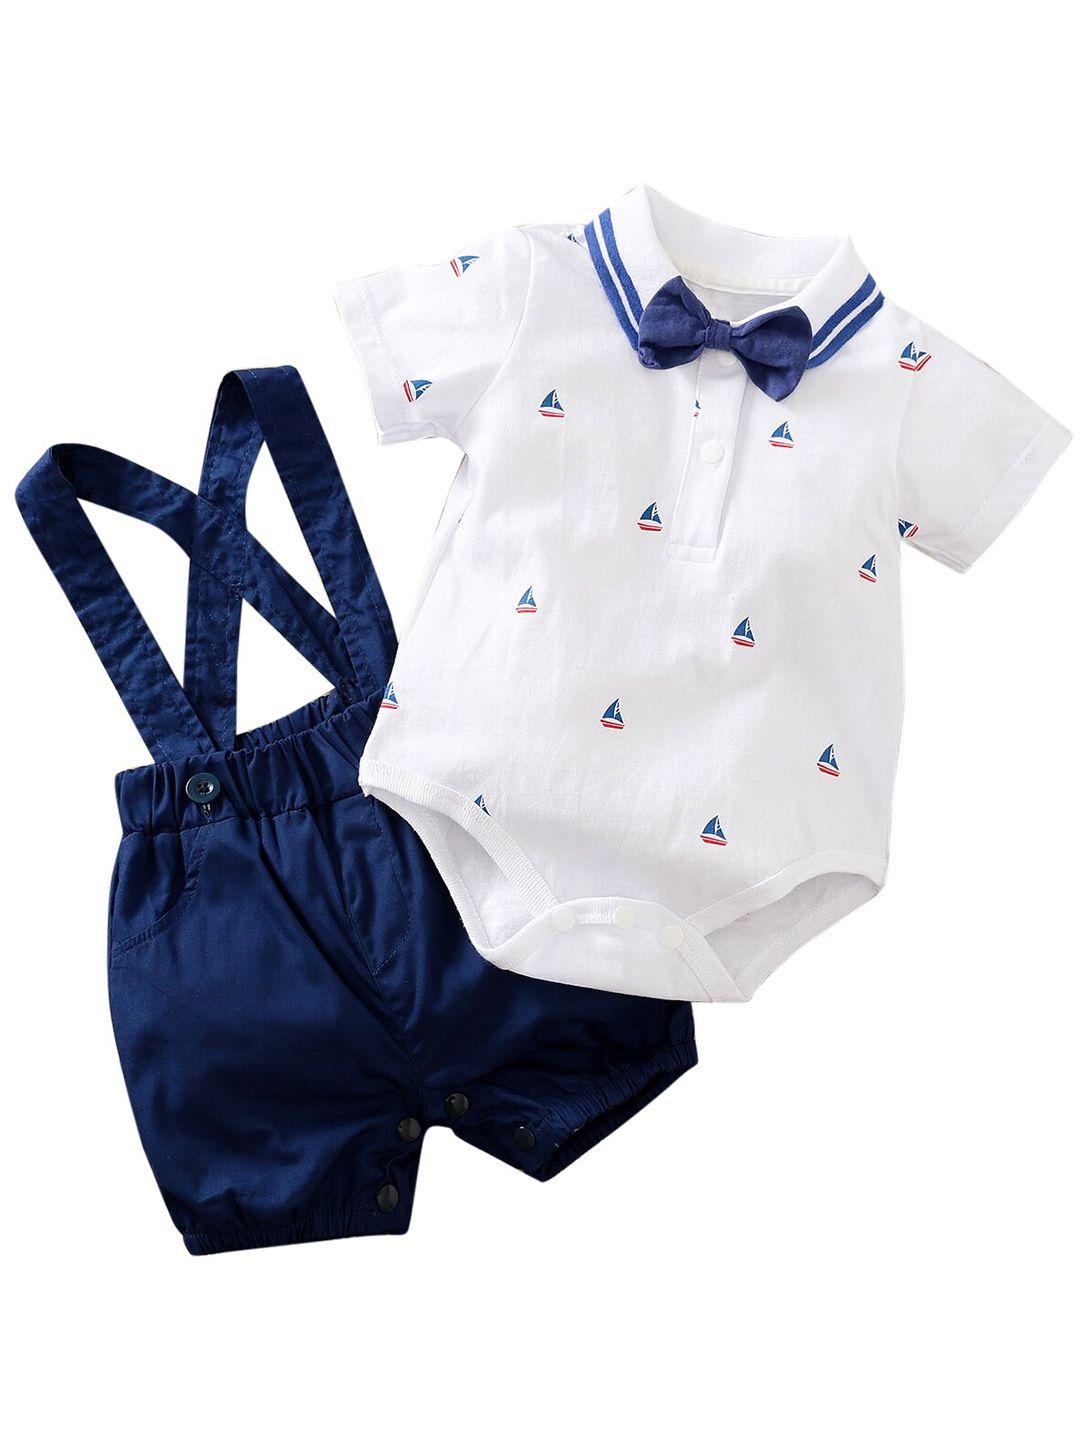 stylecast boys blue & white printed t-shirt with shorts